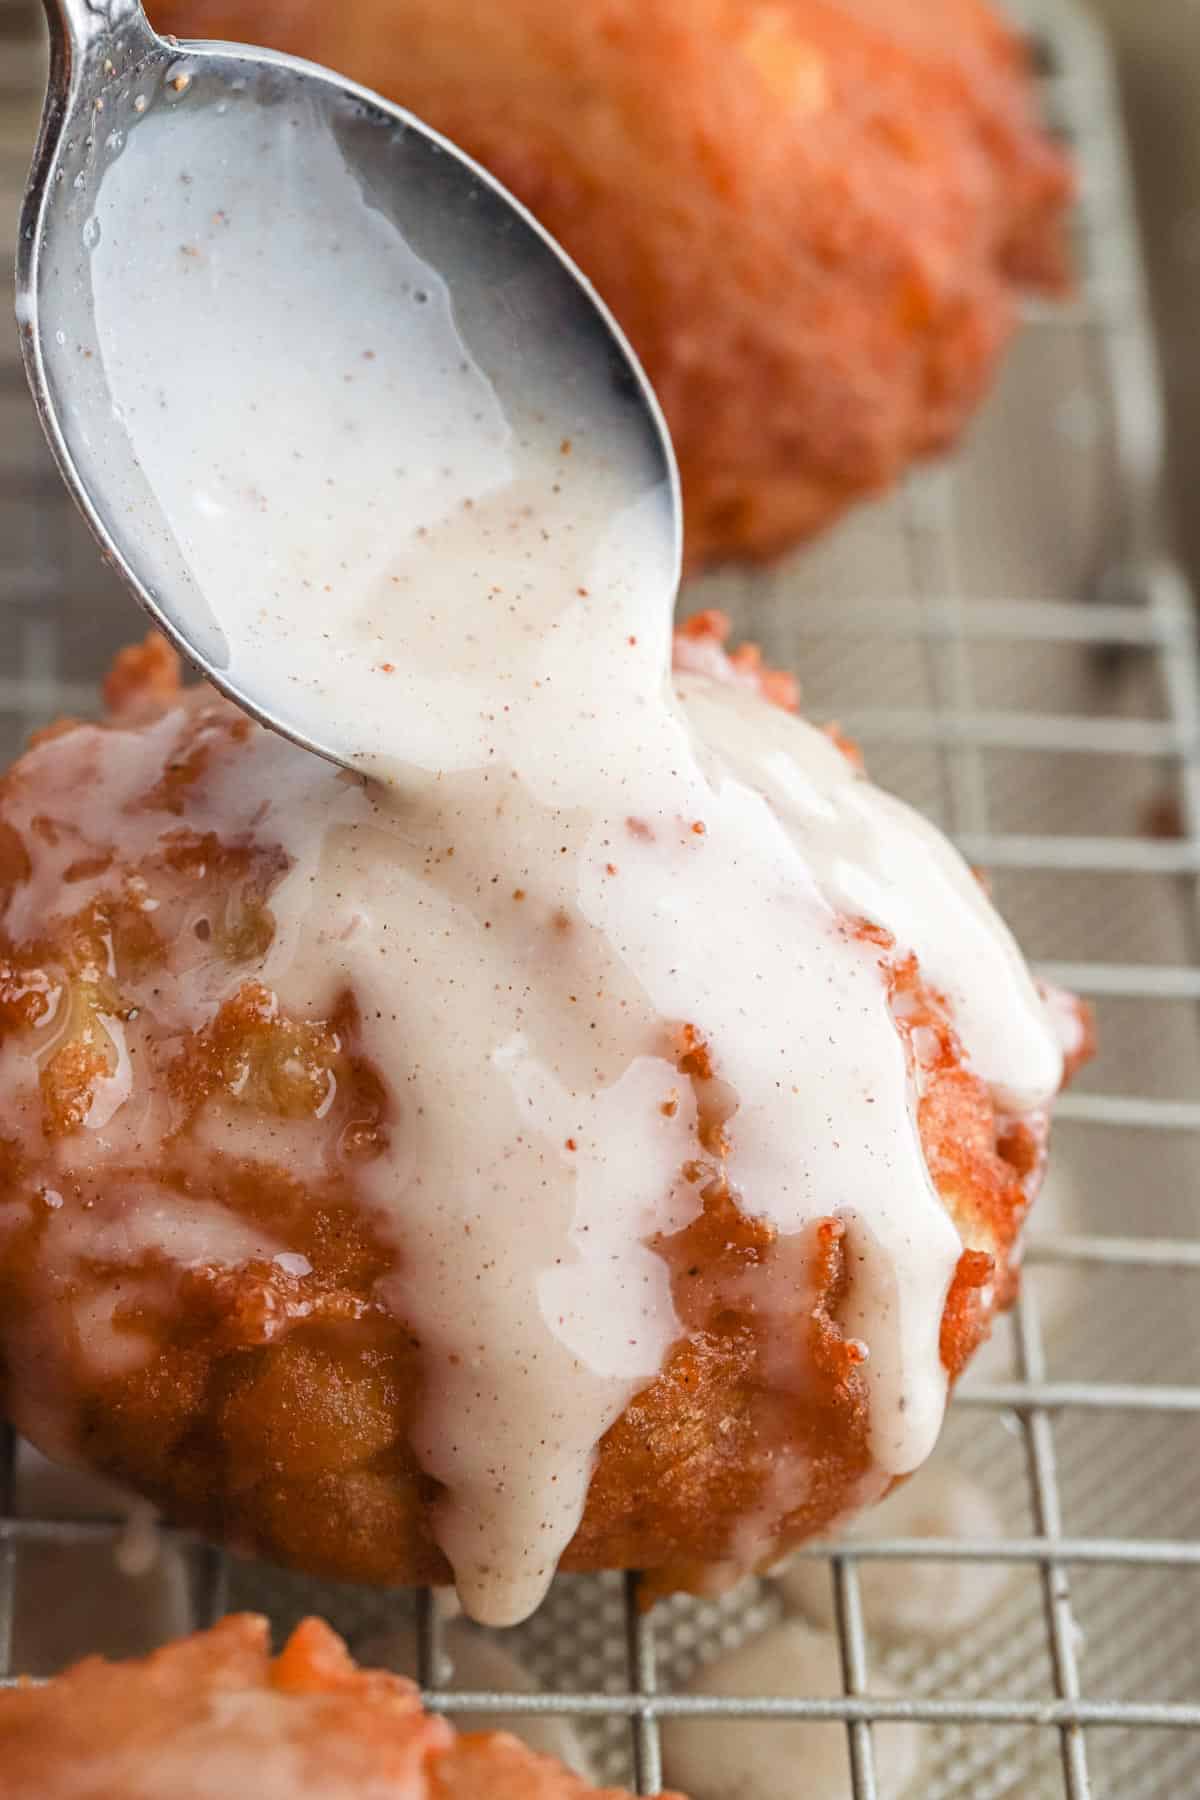 Drizzling the glaze over the top of the apple fritters.